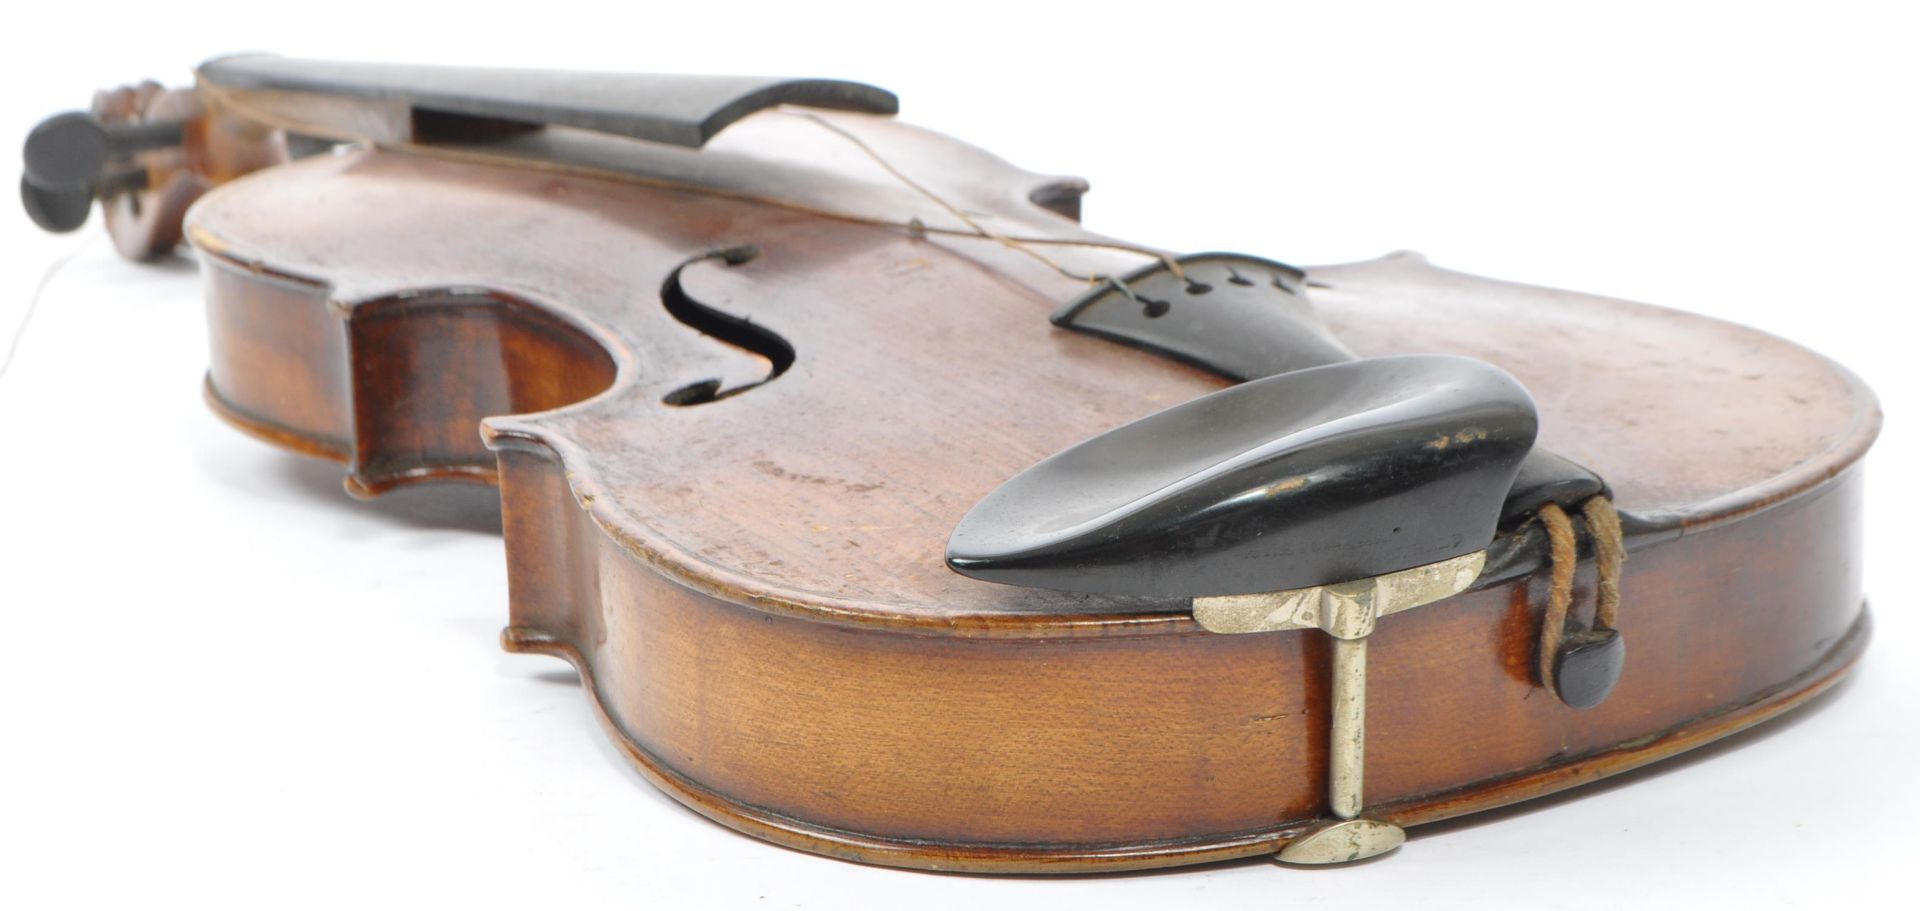 LATE 19TH / EARLY 20TH CENTURY FULL SIZE VIOLIN - Image 5 of 7